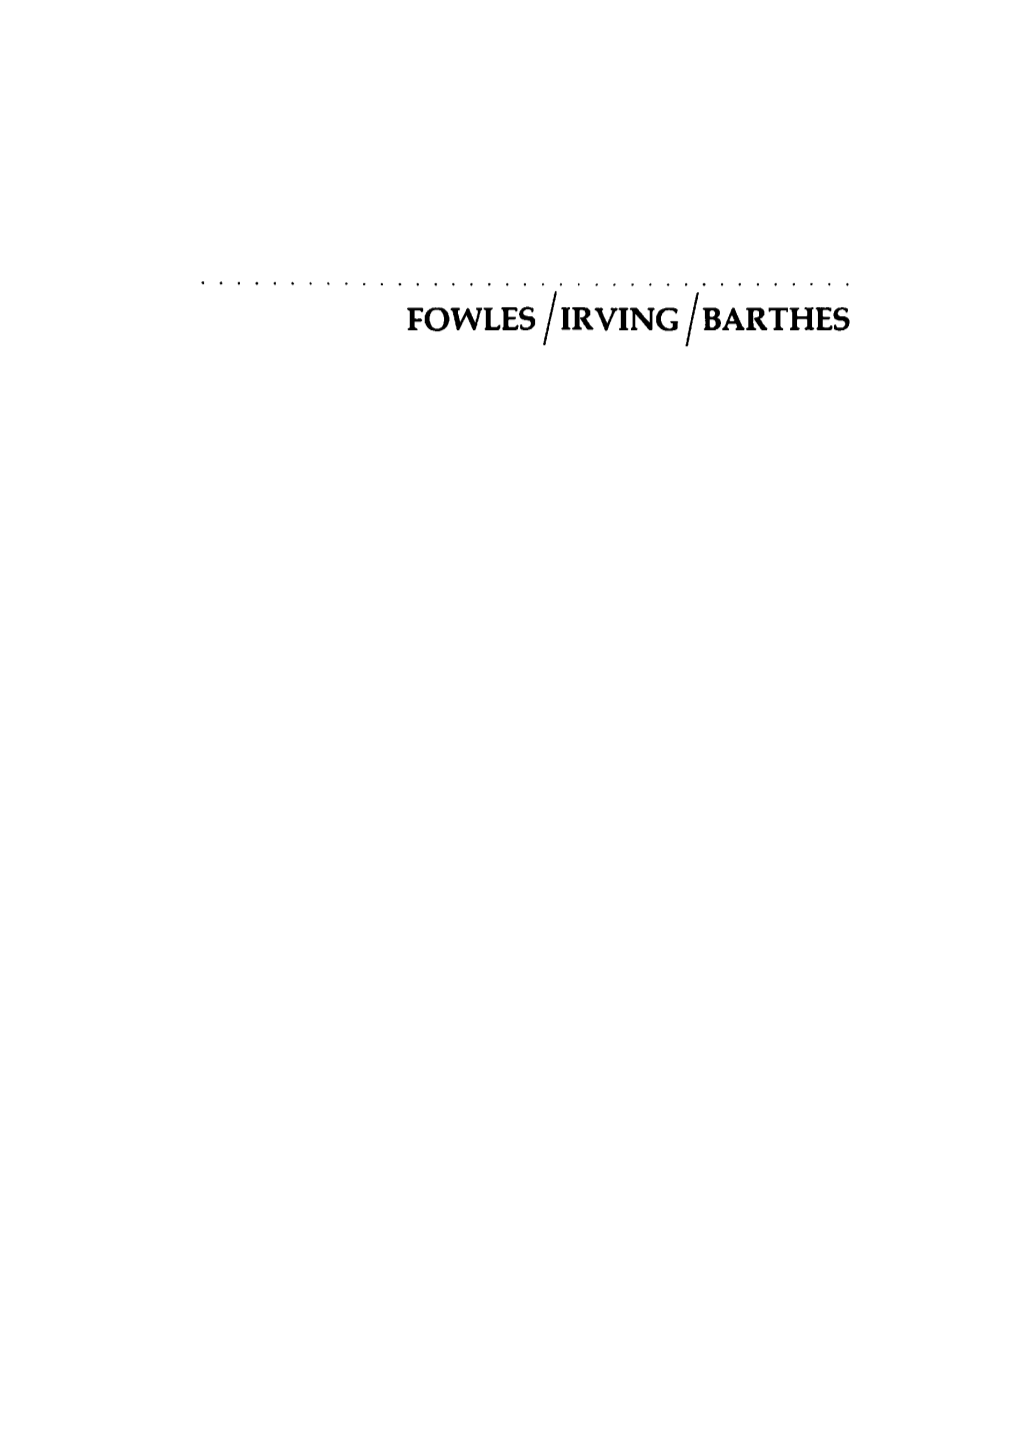 Fowles /Irving /Barthes